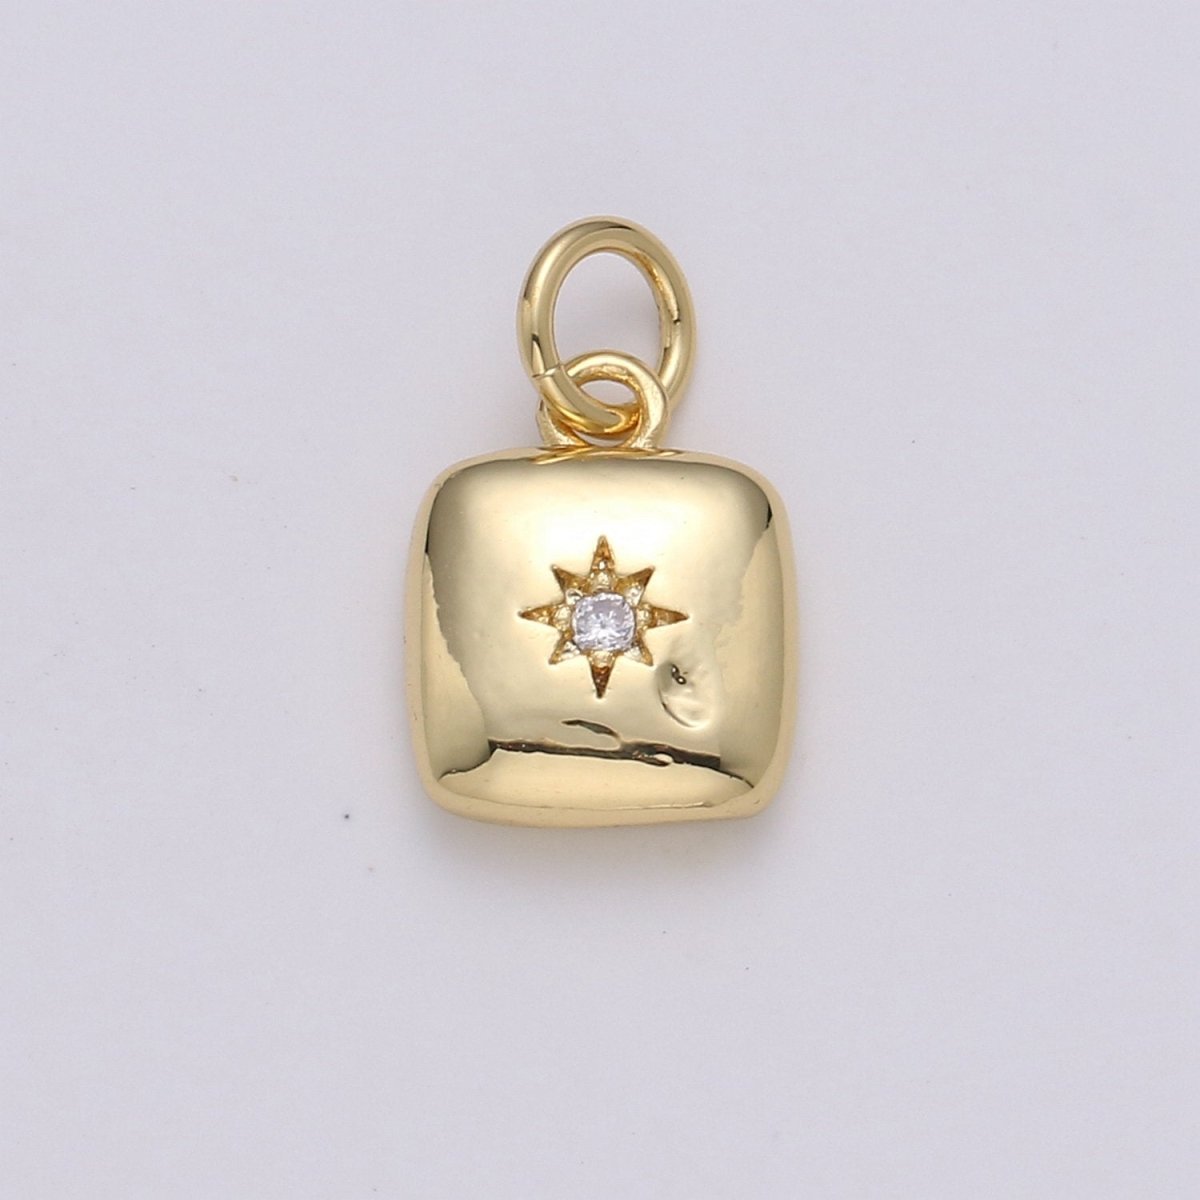 Dainty 14k Gold Filled North Star Charm Cubic Zirconia Square Pendant in Gold micro Pave CZ North Star Pendant Jewelry Making D-431 D-432 - DLUXCA